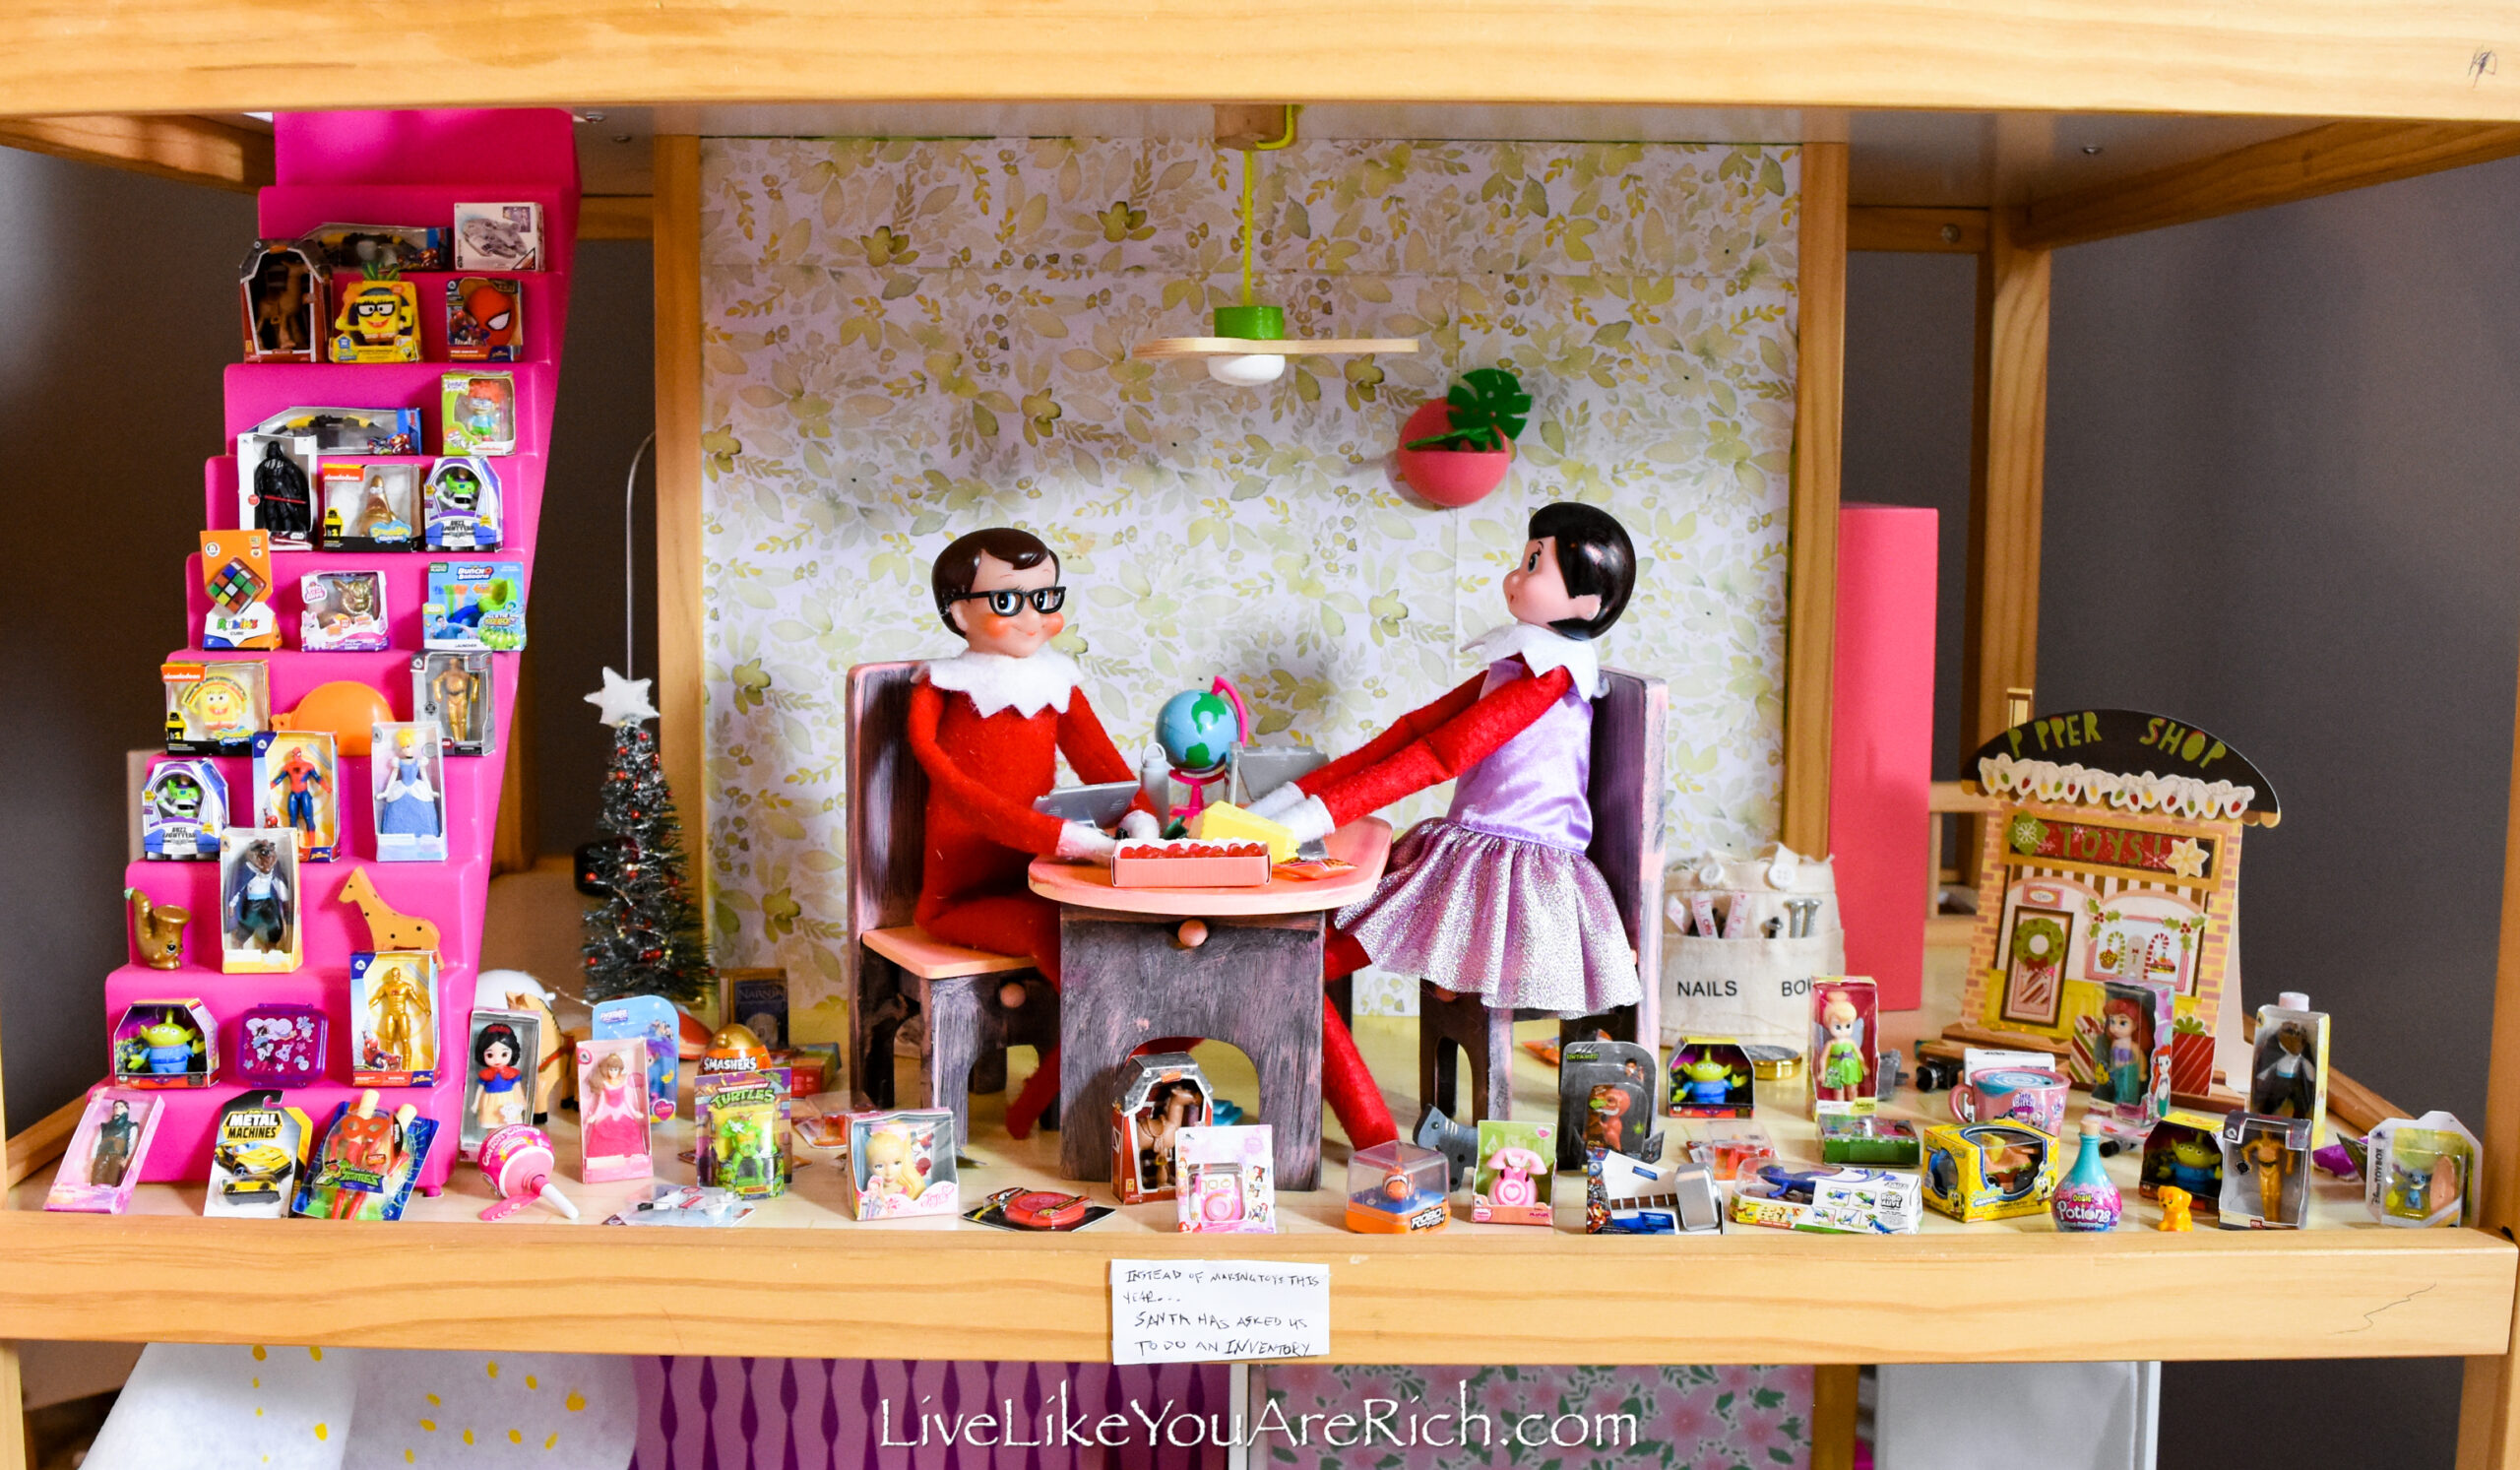 Elf on the Shelf: Toy Inventory